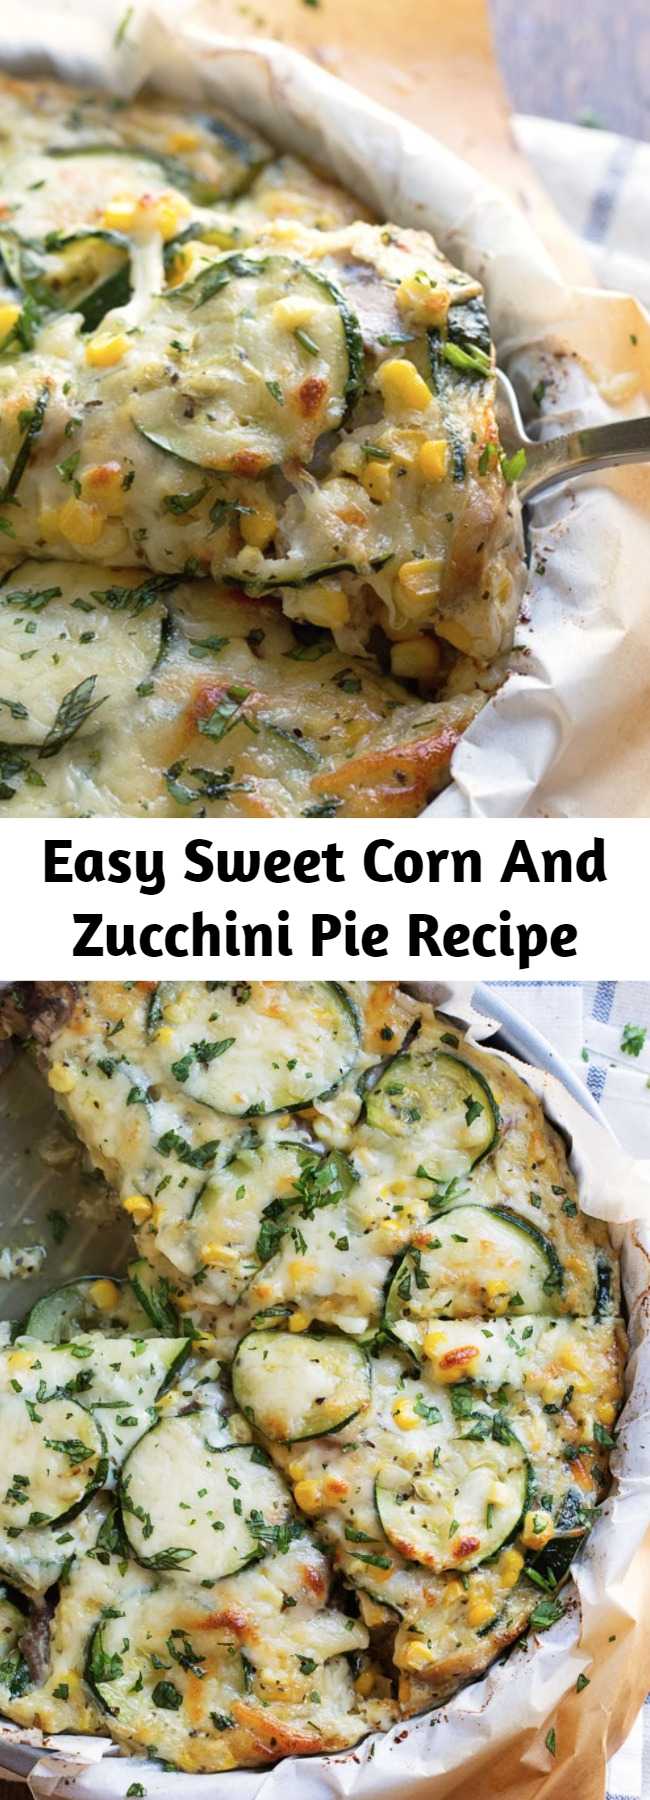 Easy Sweet Corn And Zucchini Pie Recipe - This crustless Sweet Corn and Zucchini Pie is so incredibly simple to make and it’s the perfect way to enjoy summer produce! #corn #zucchini #summer #pie #cheese